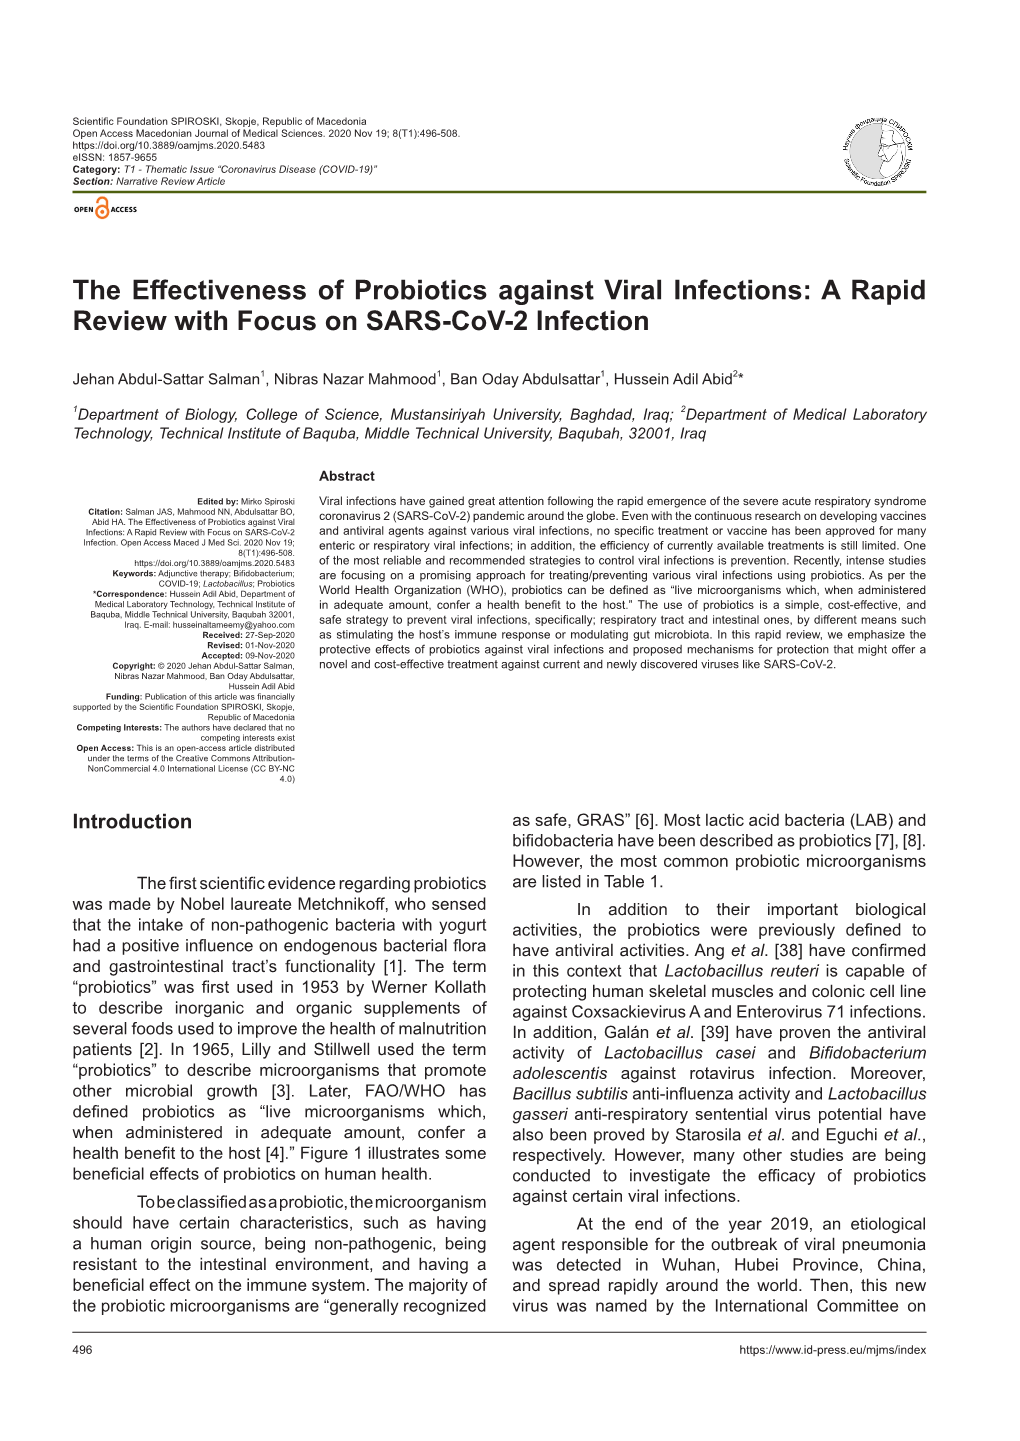 The Effectiveness of Probiotics Against Viral Infections: a Rapid Review with Focus on SARS-Cov-2 Infection